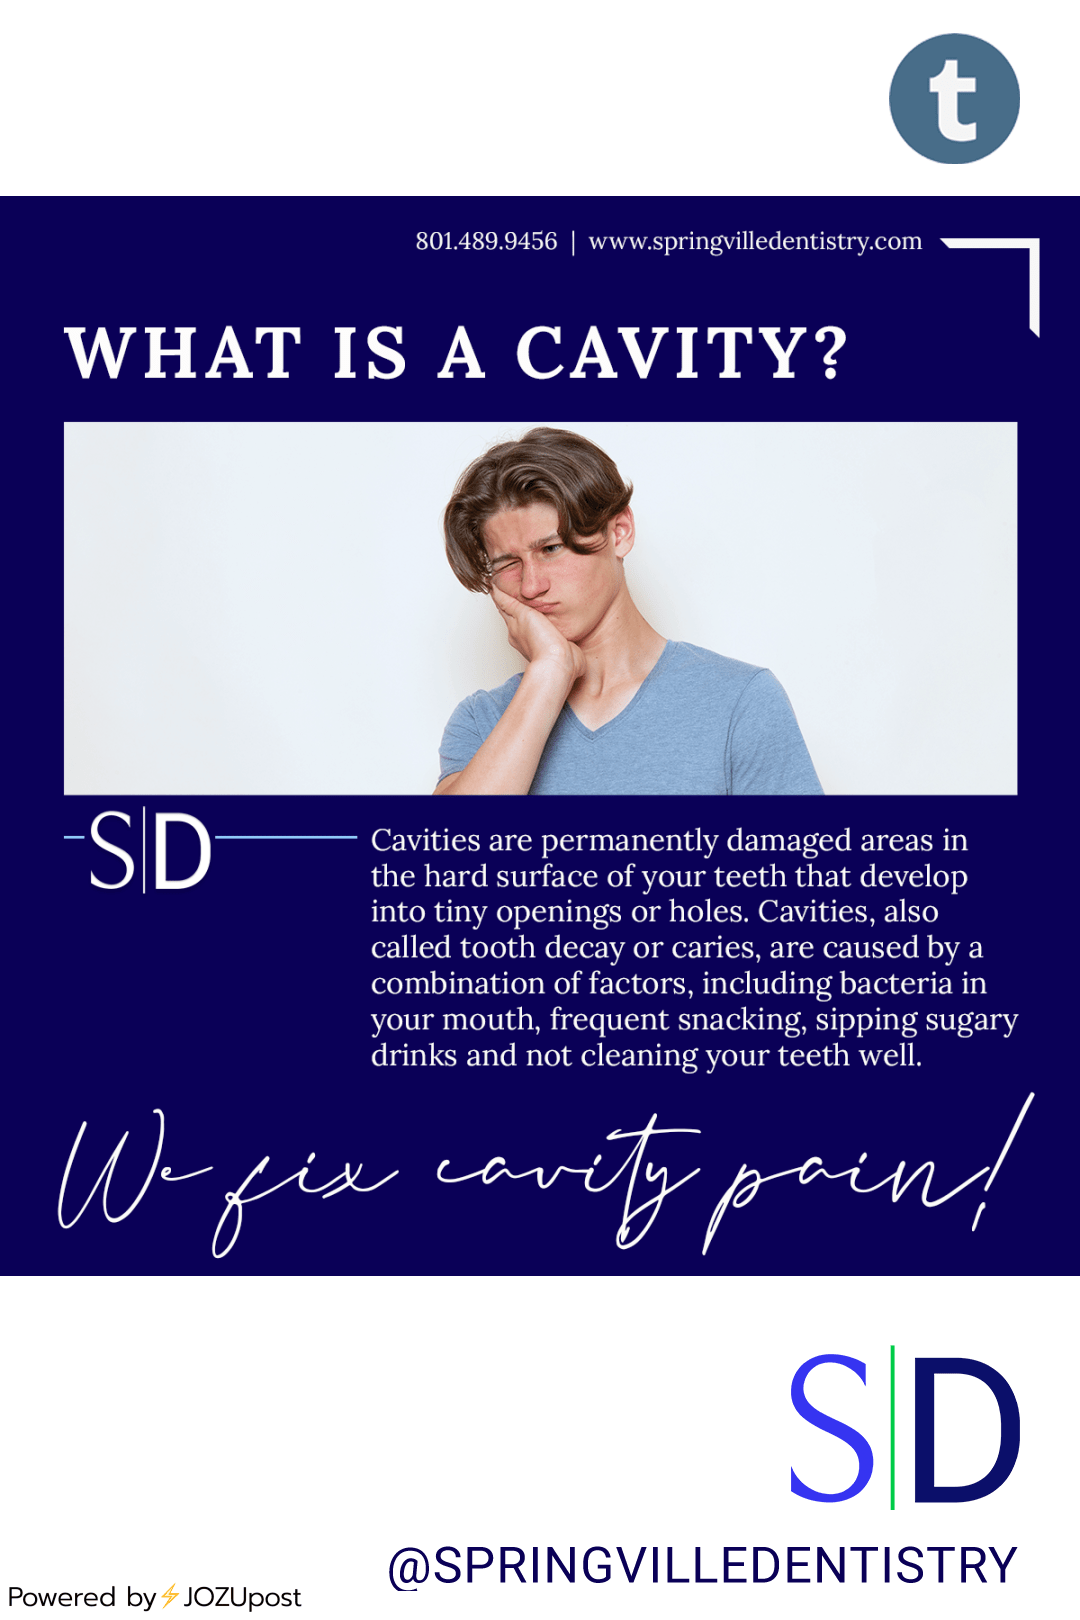 WHAT IS A CAVITY? Cavities are permanently damaged areas in the hard surface of your teeth that develop into tiny openings or holes. Cavities, also called tooth decay or caries, are caused by a combination of factors, including bacteria in your...